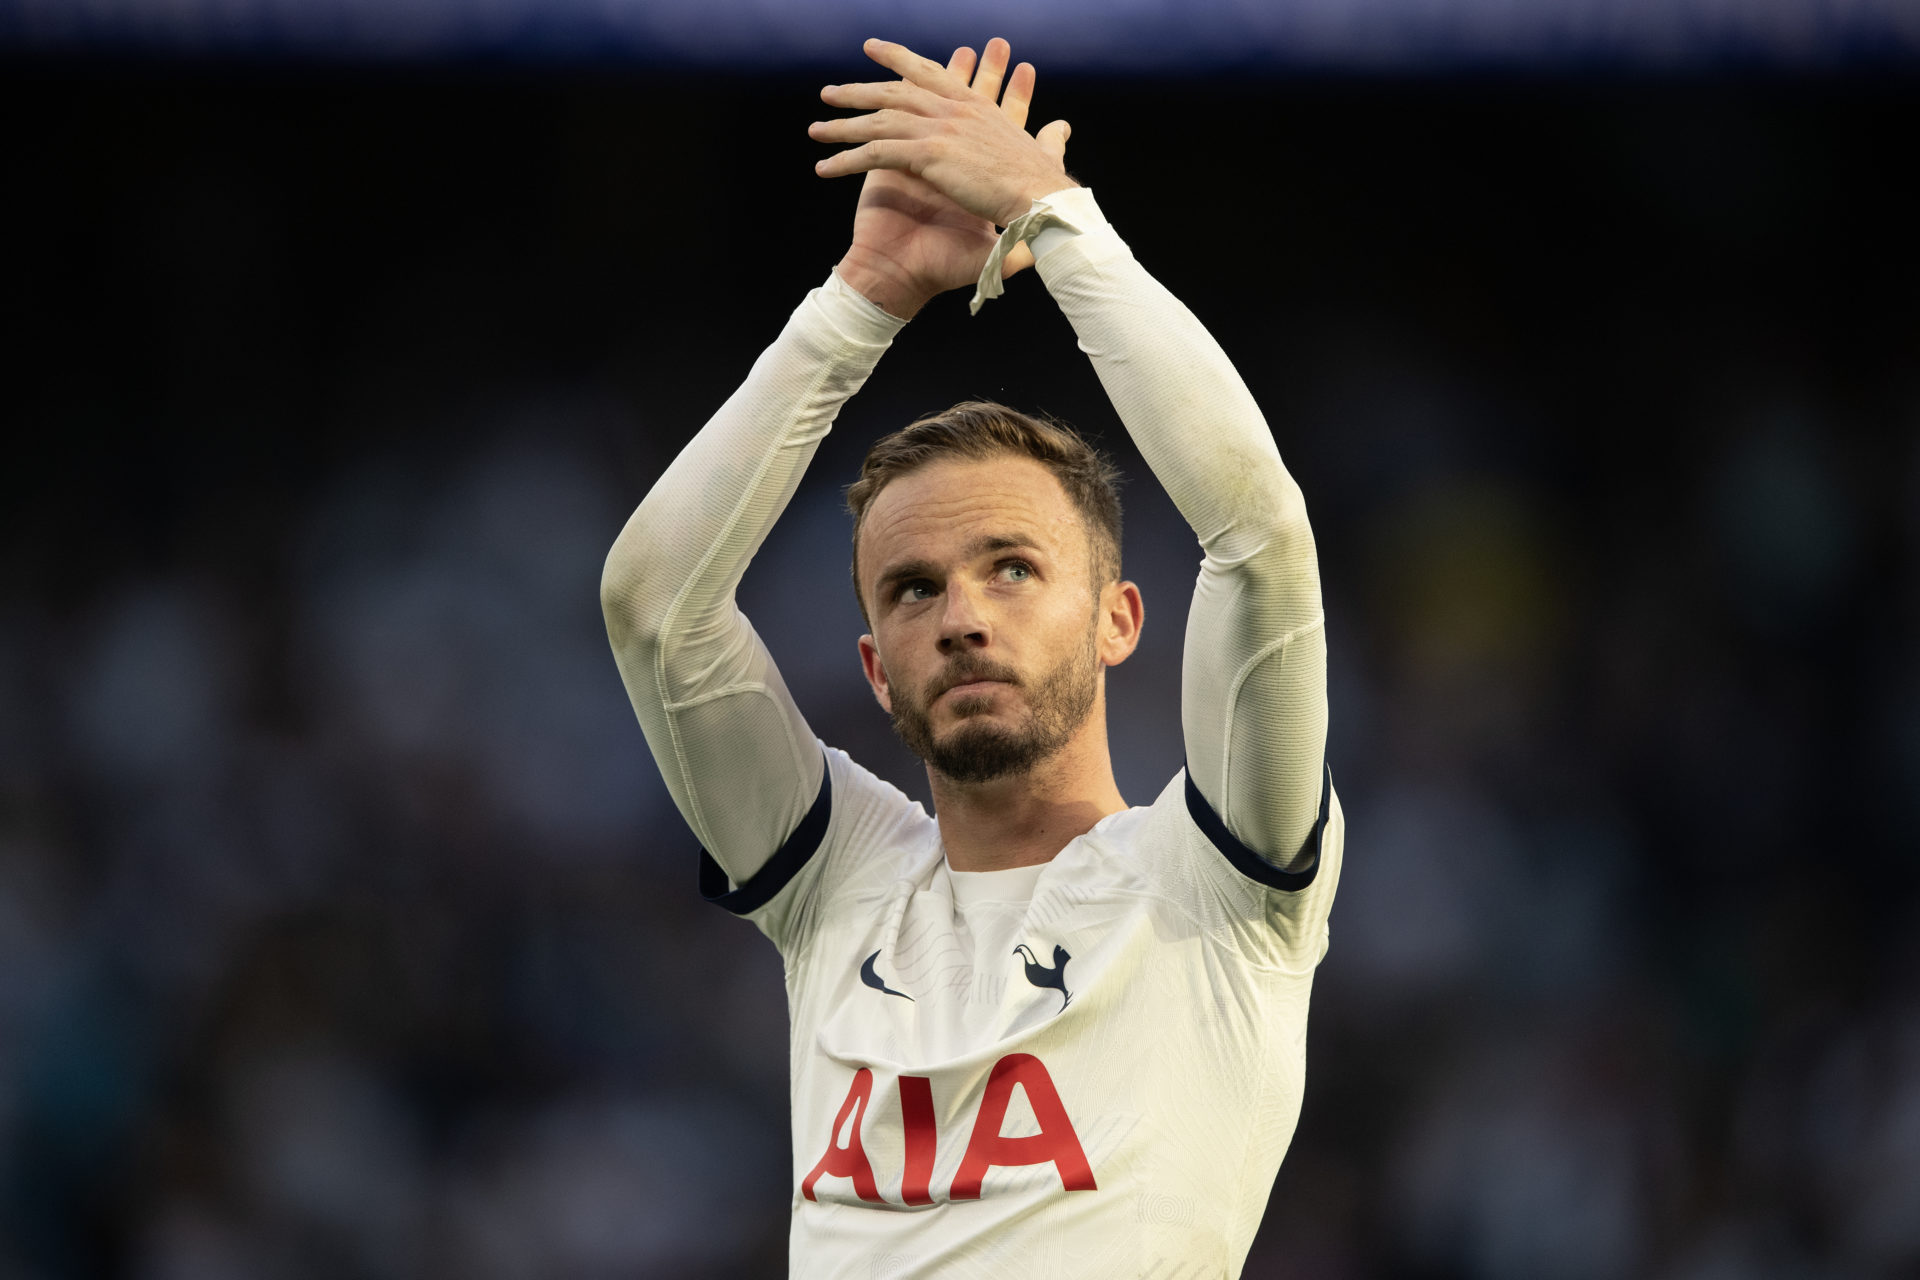 Infectious - Tottenham star is making a huge impression on Maddison